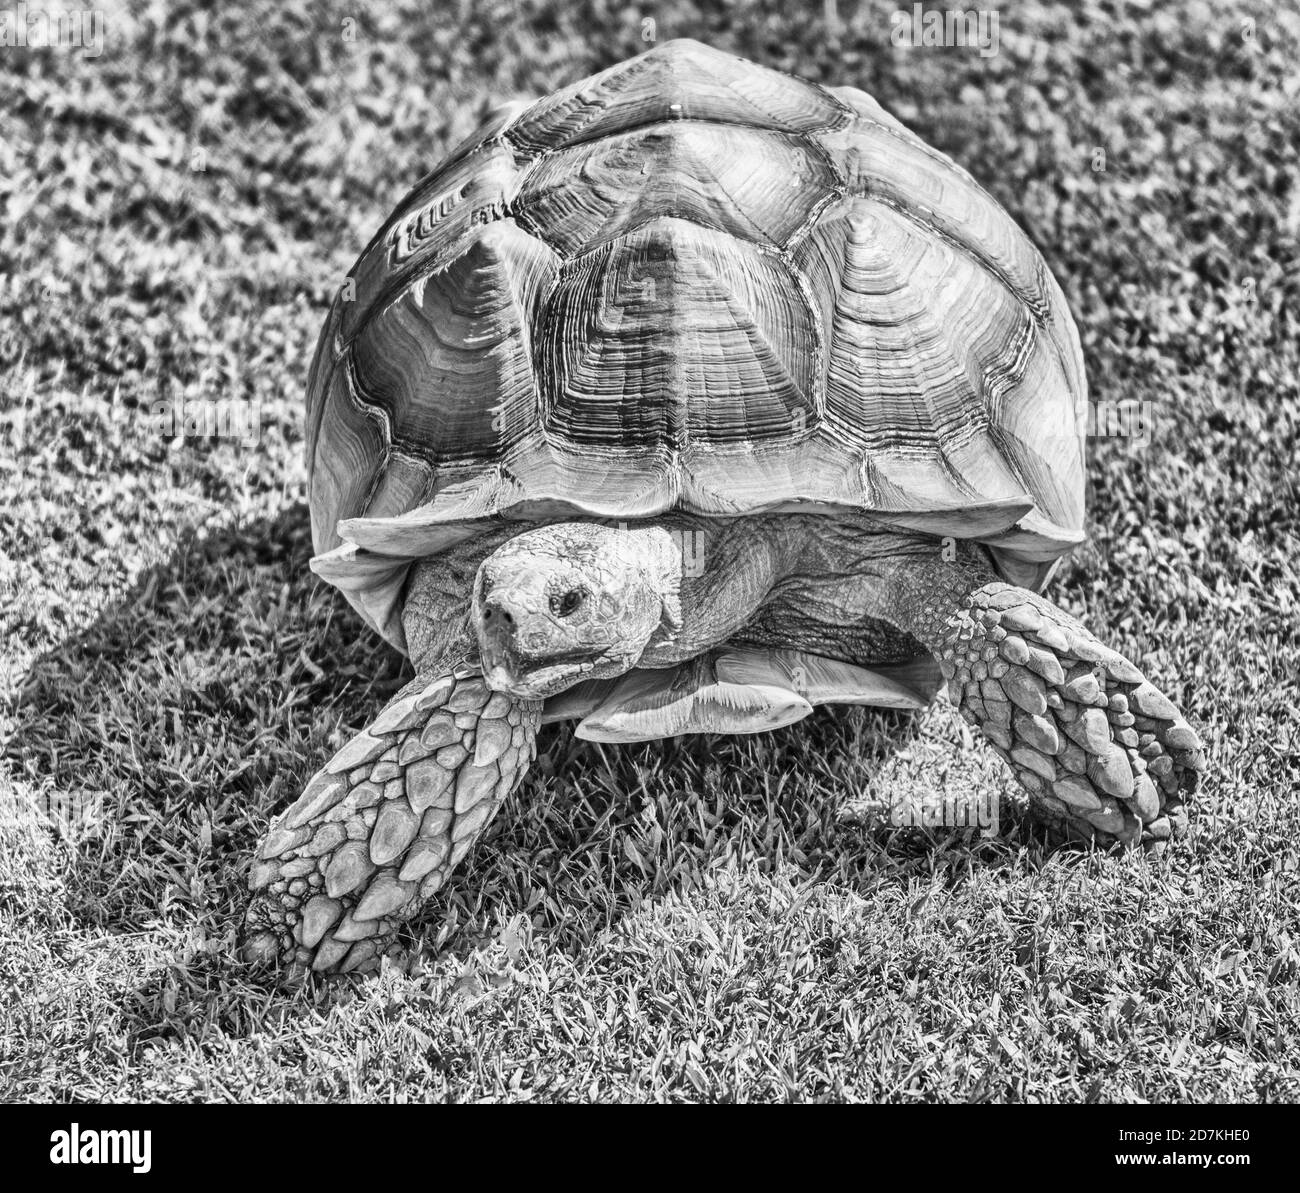 African spurred tortoise also known as sulcata tortoise, land turtle walking on the grass Stock Photo